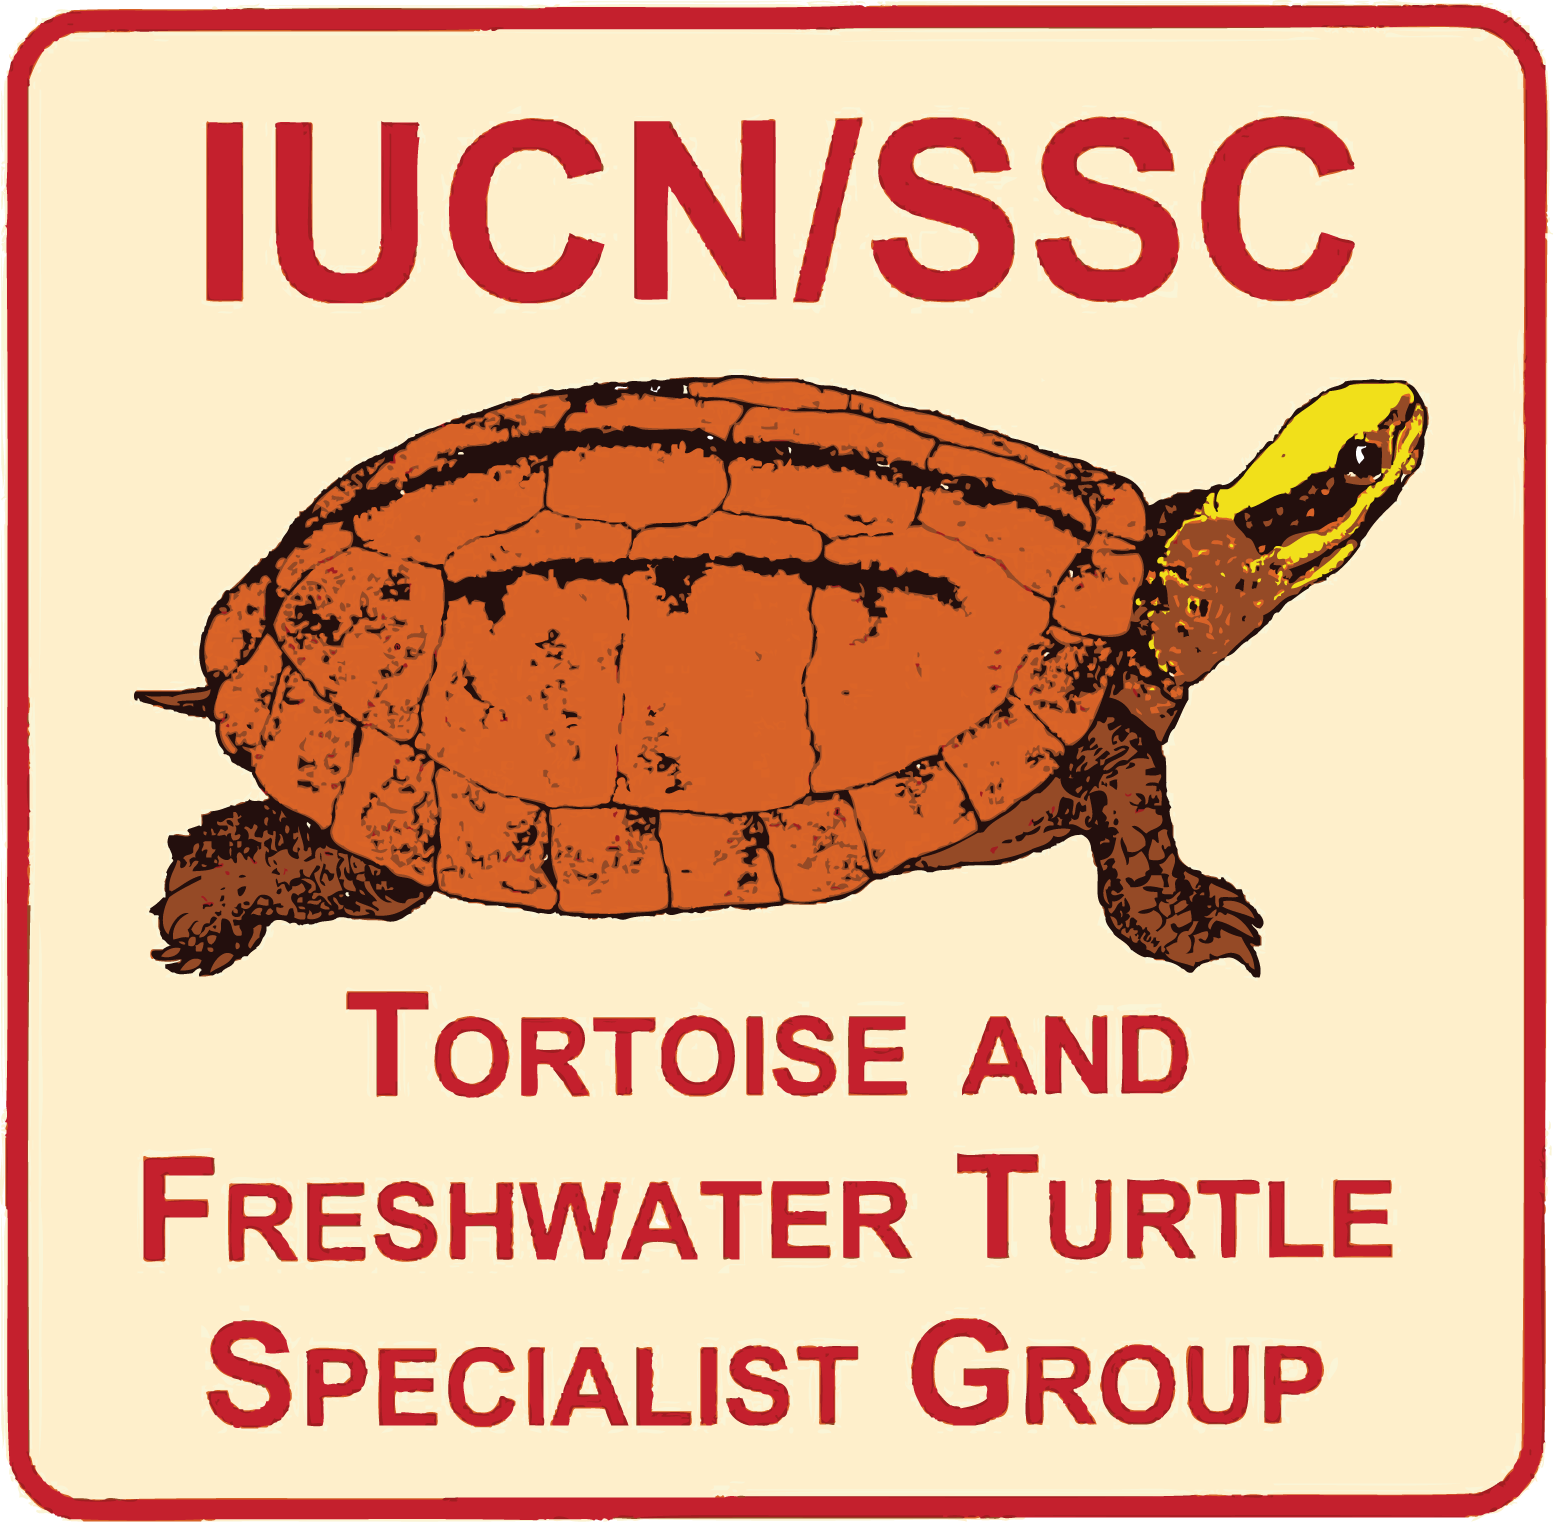 Tortoise and Freshwater Turtle Specialist Group